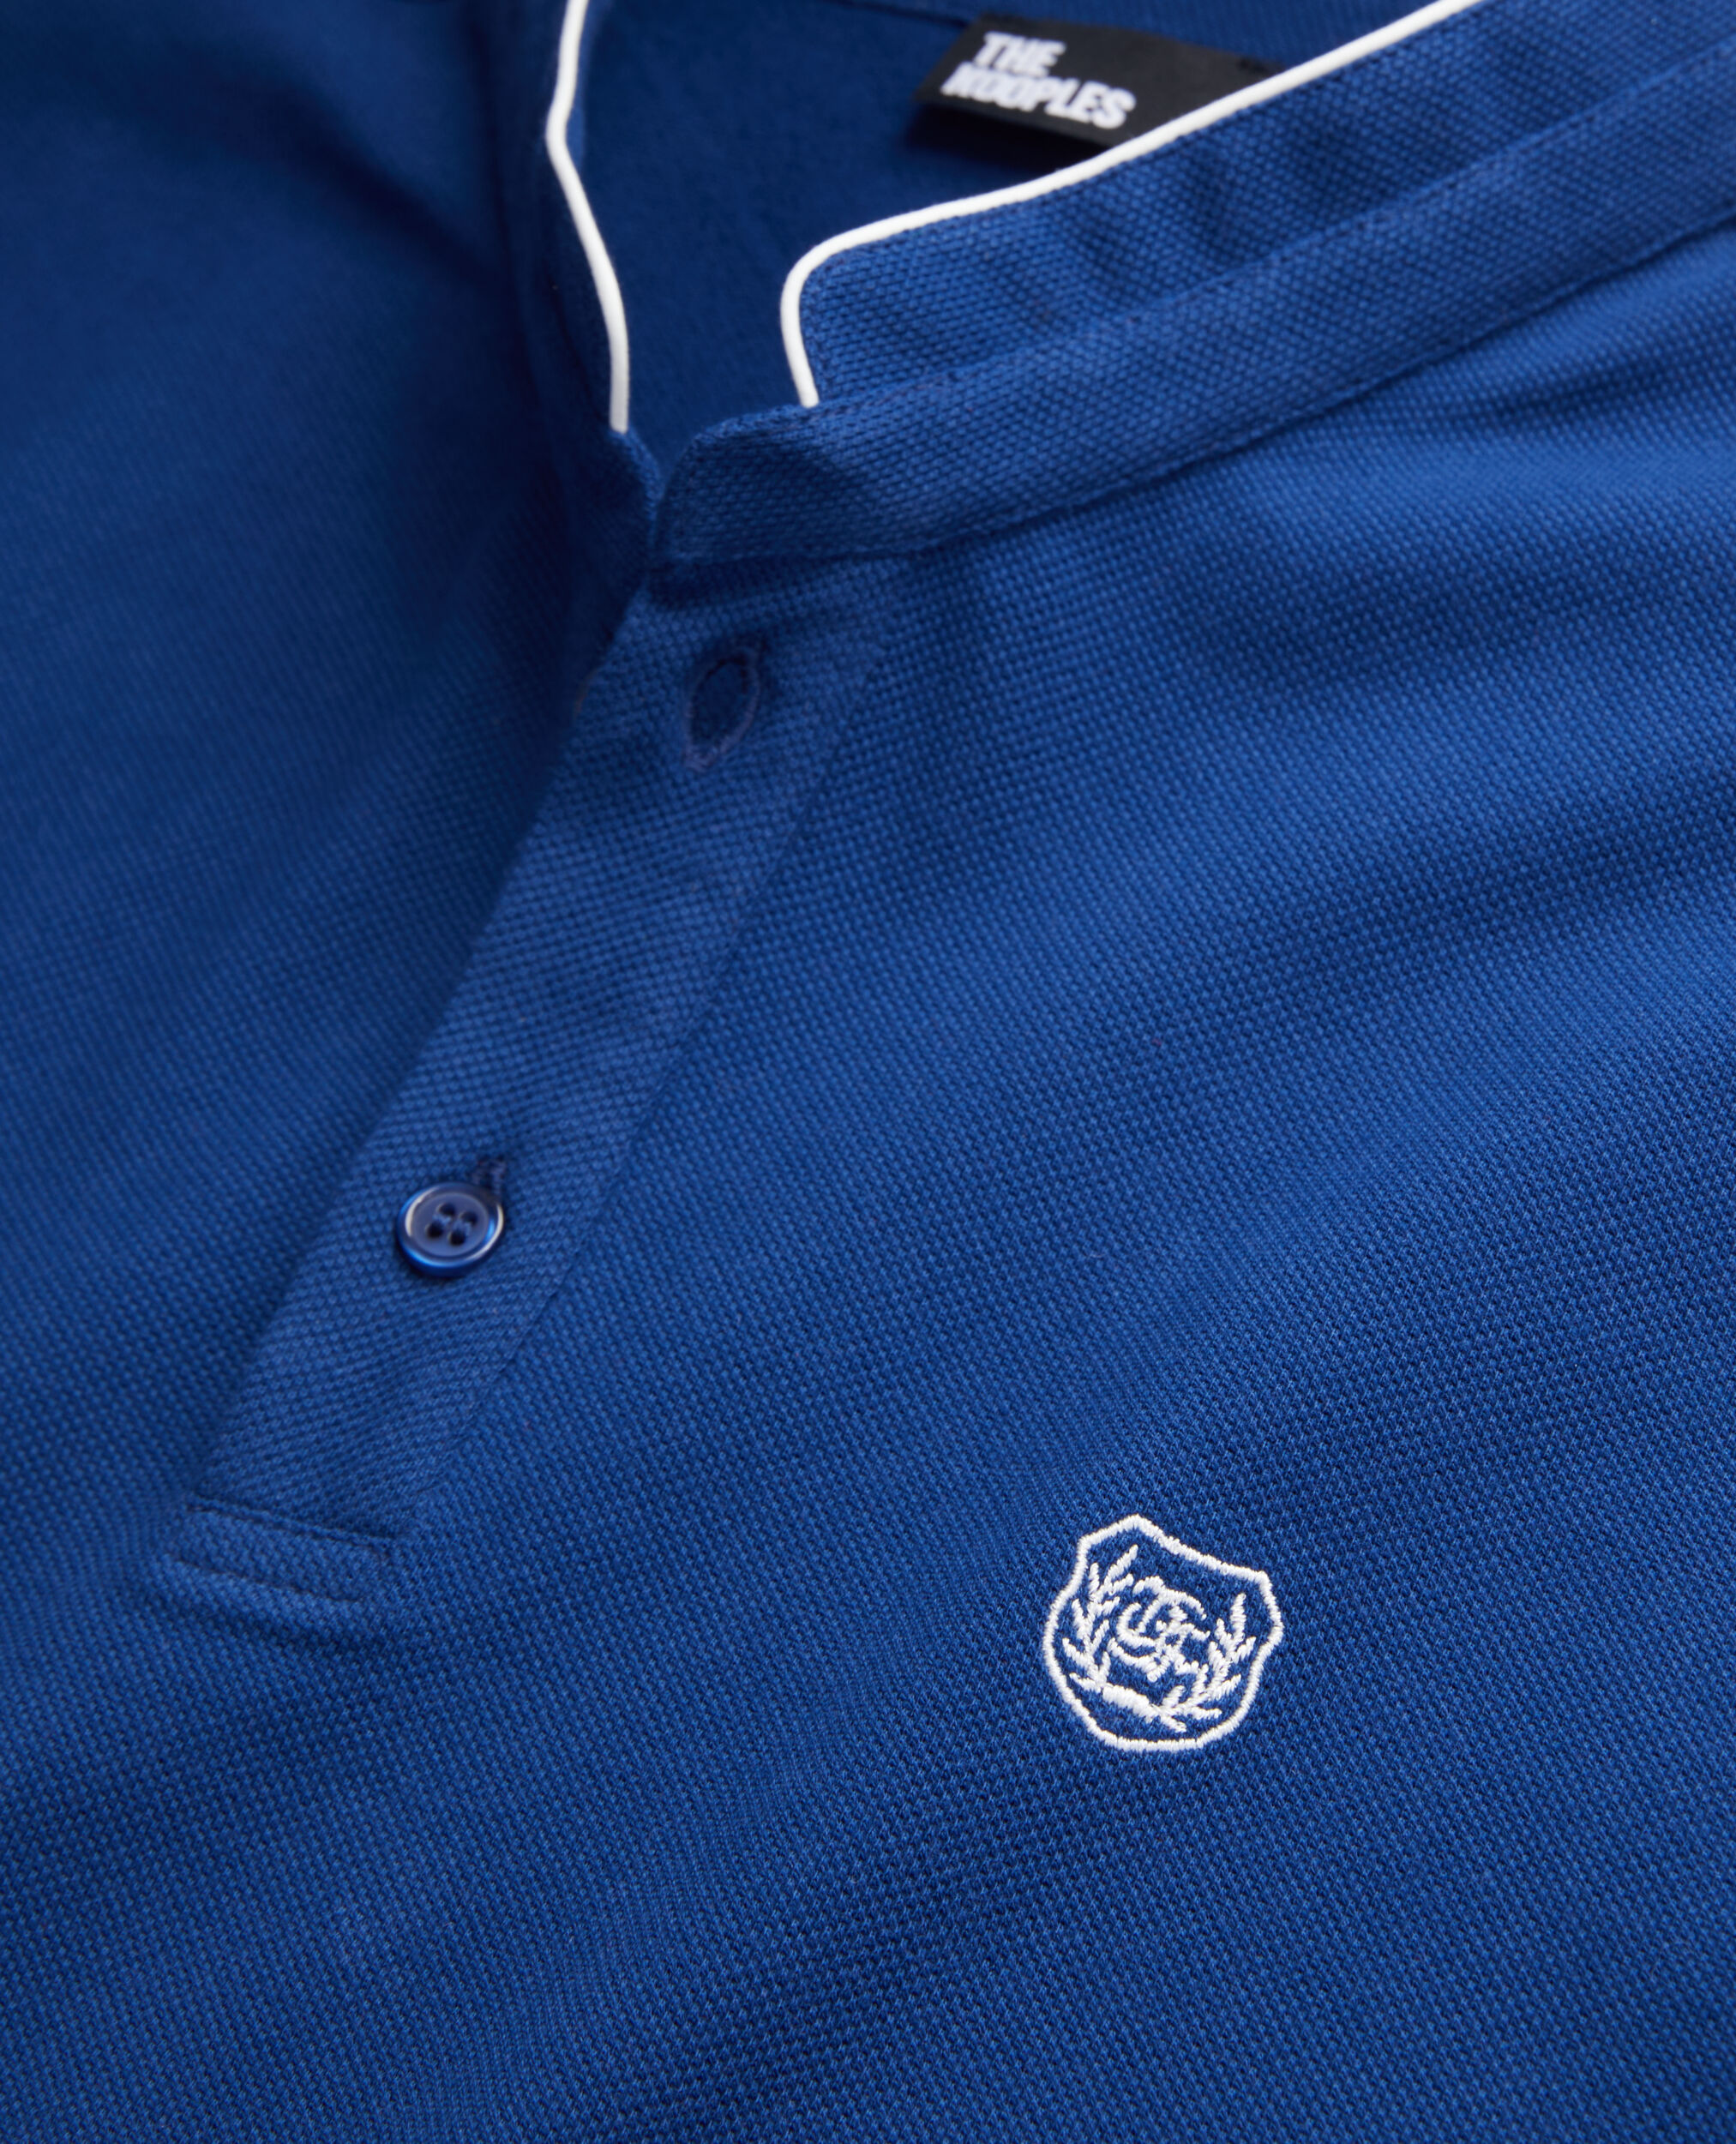 Navy blue cotton polo t-shirt, ROYAL BLUE - DARK NAVY, hi-res image number null